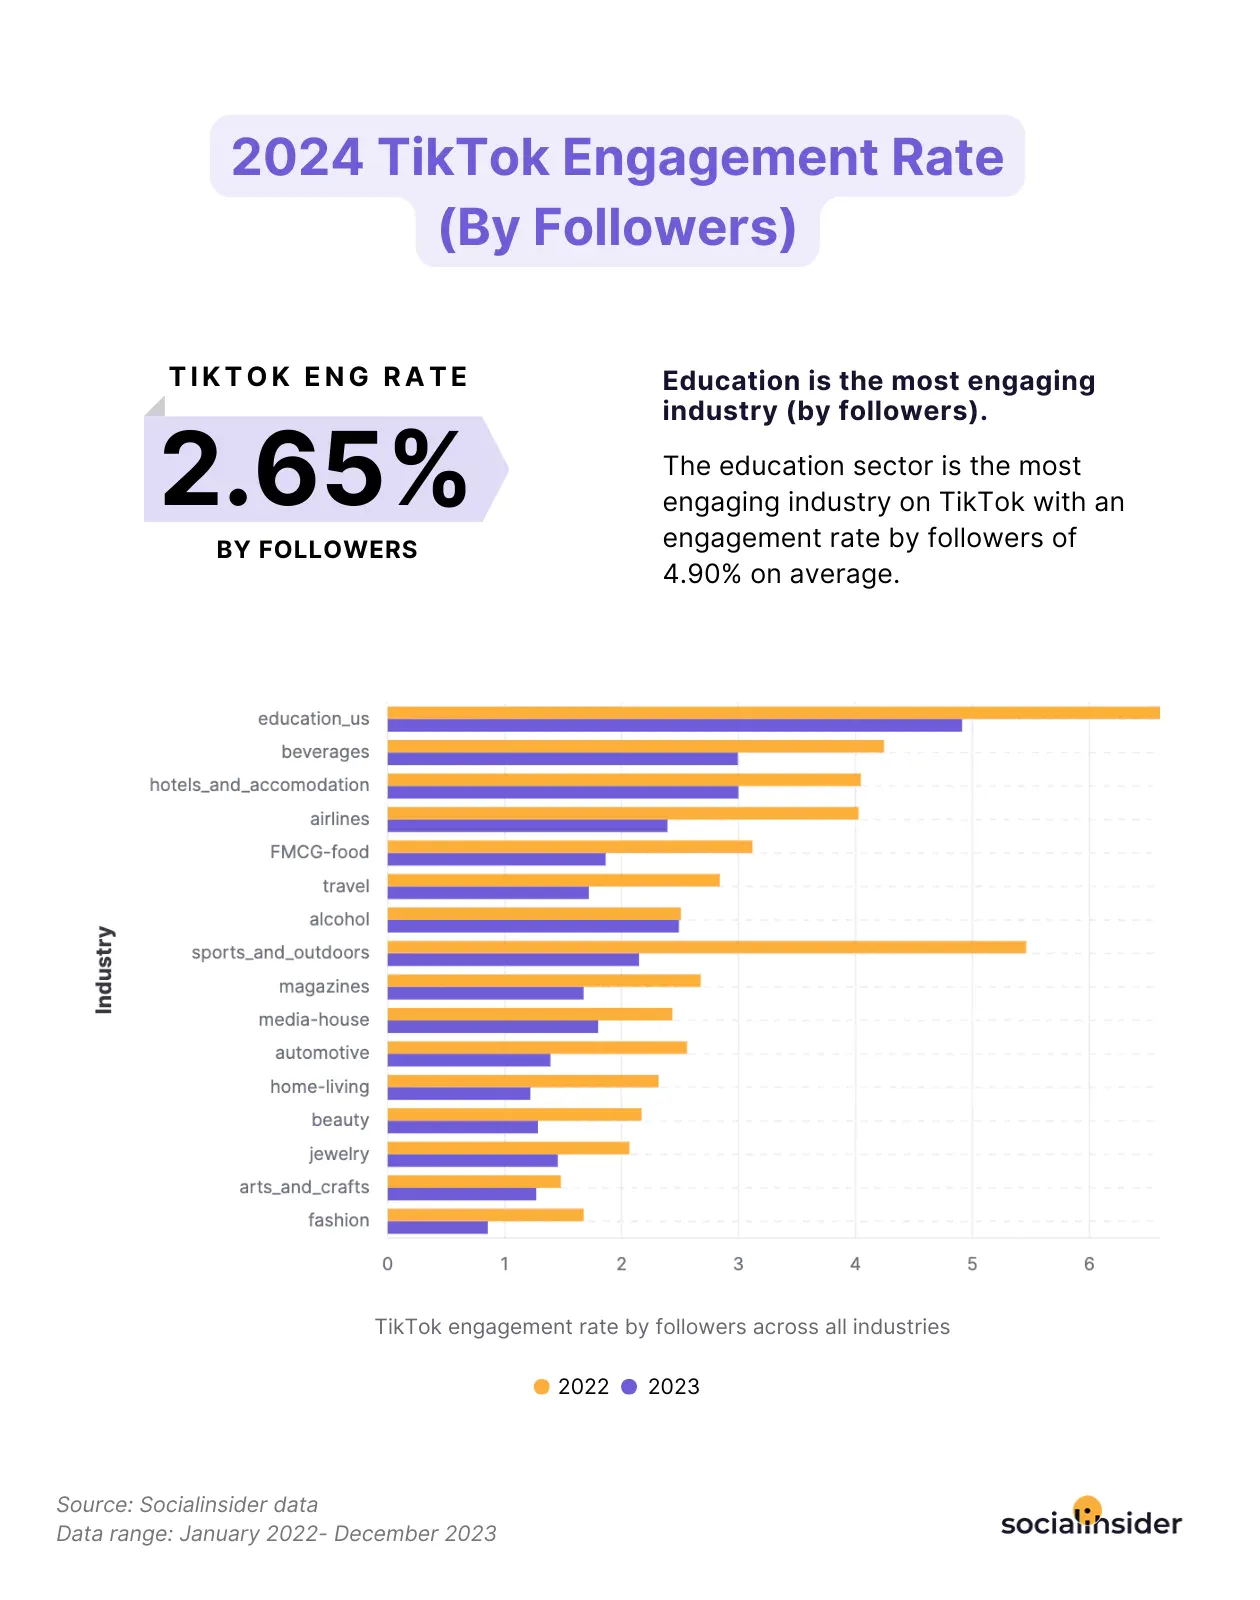 tiktok engagement rate benchmark by followers